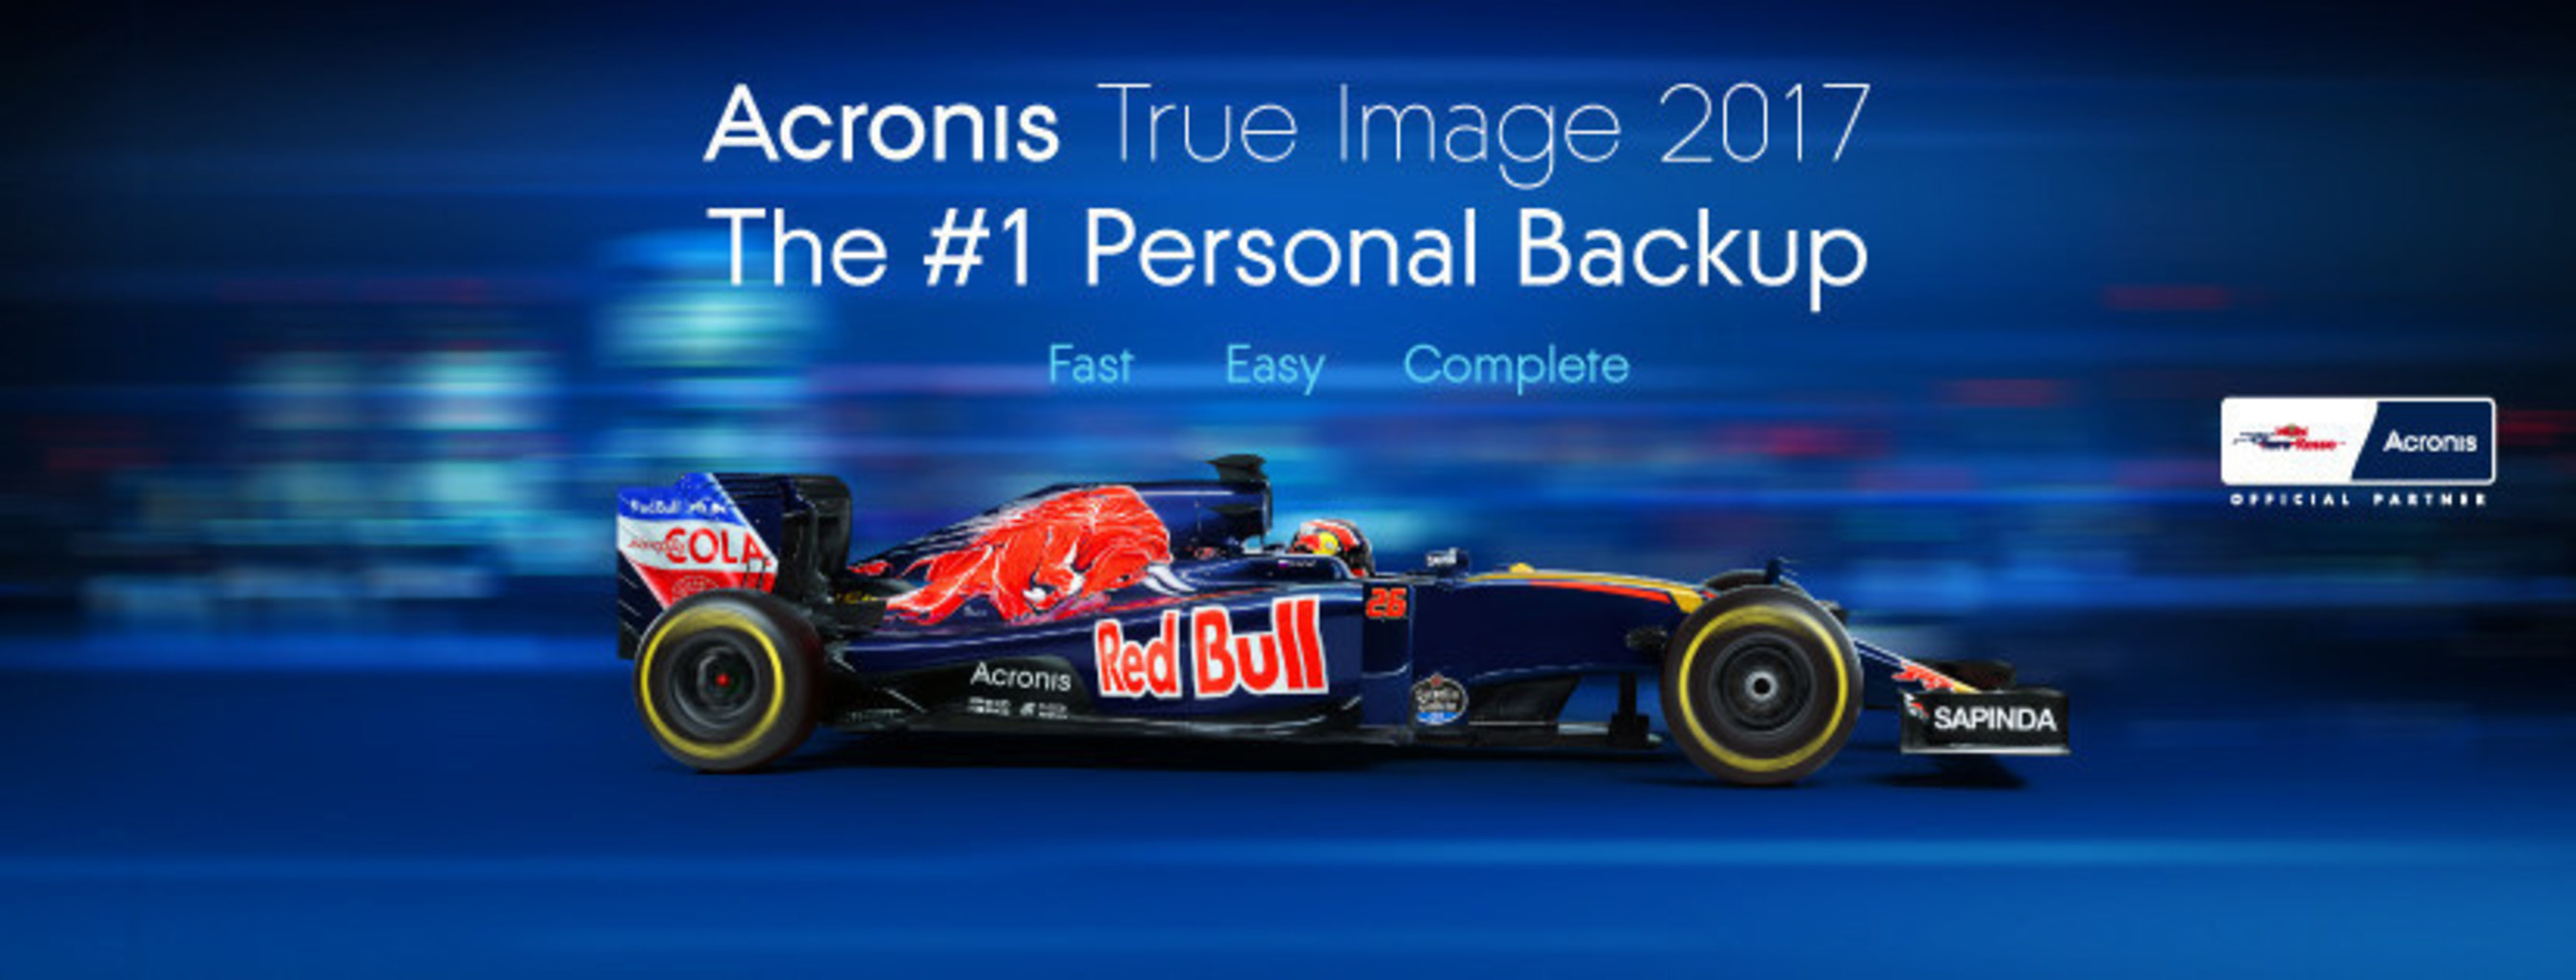 Acronis True Image 2017 Available Now